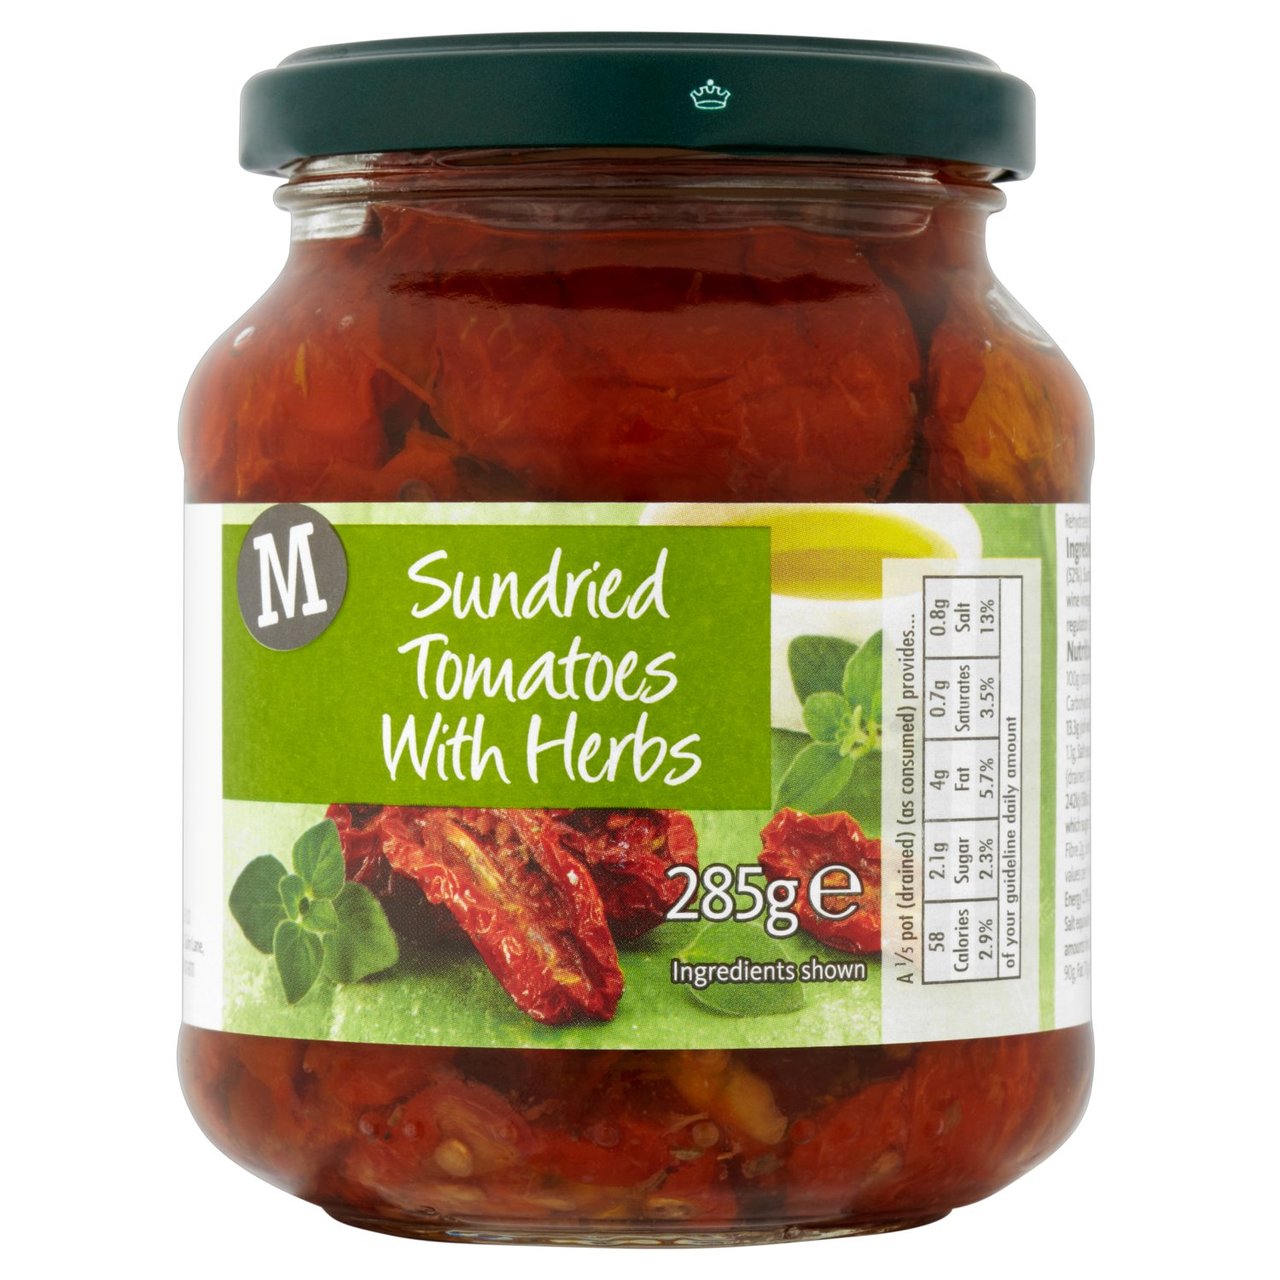 M Sundried Tomatoes In Oil With Herbs 285g [971]